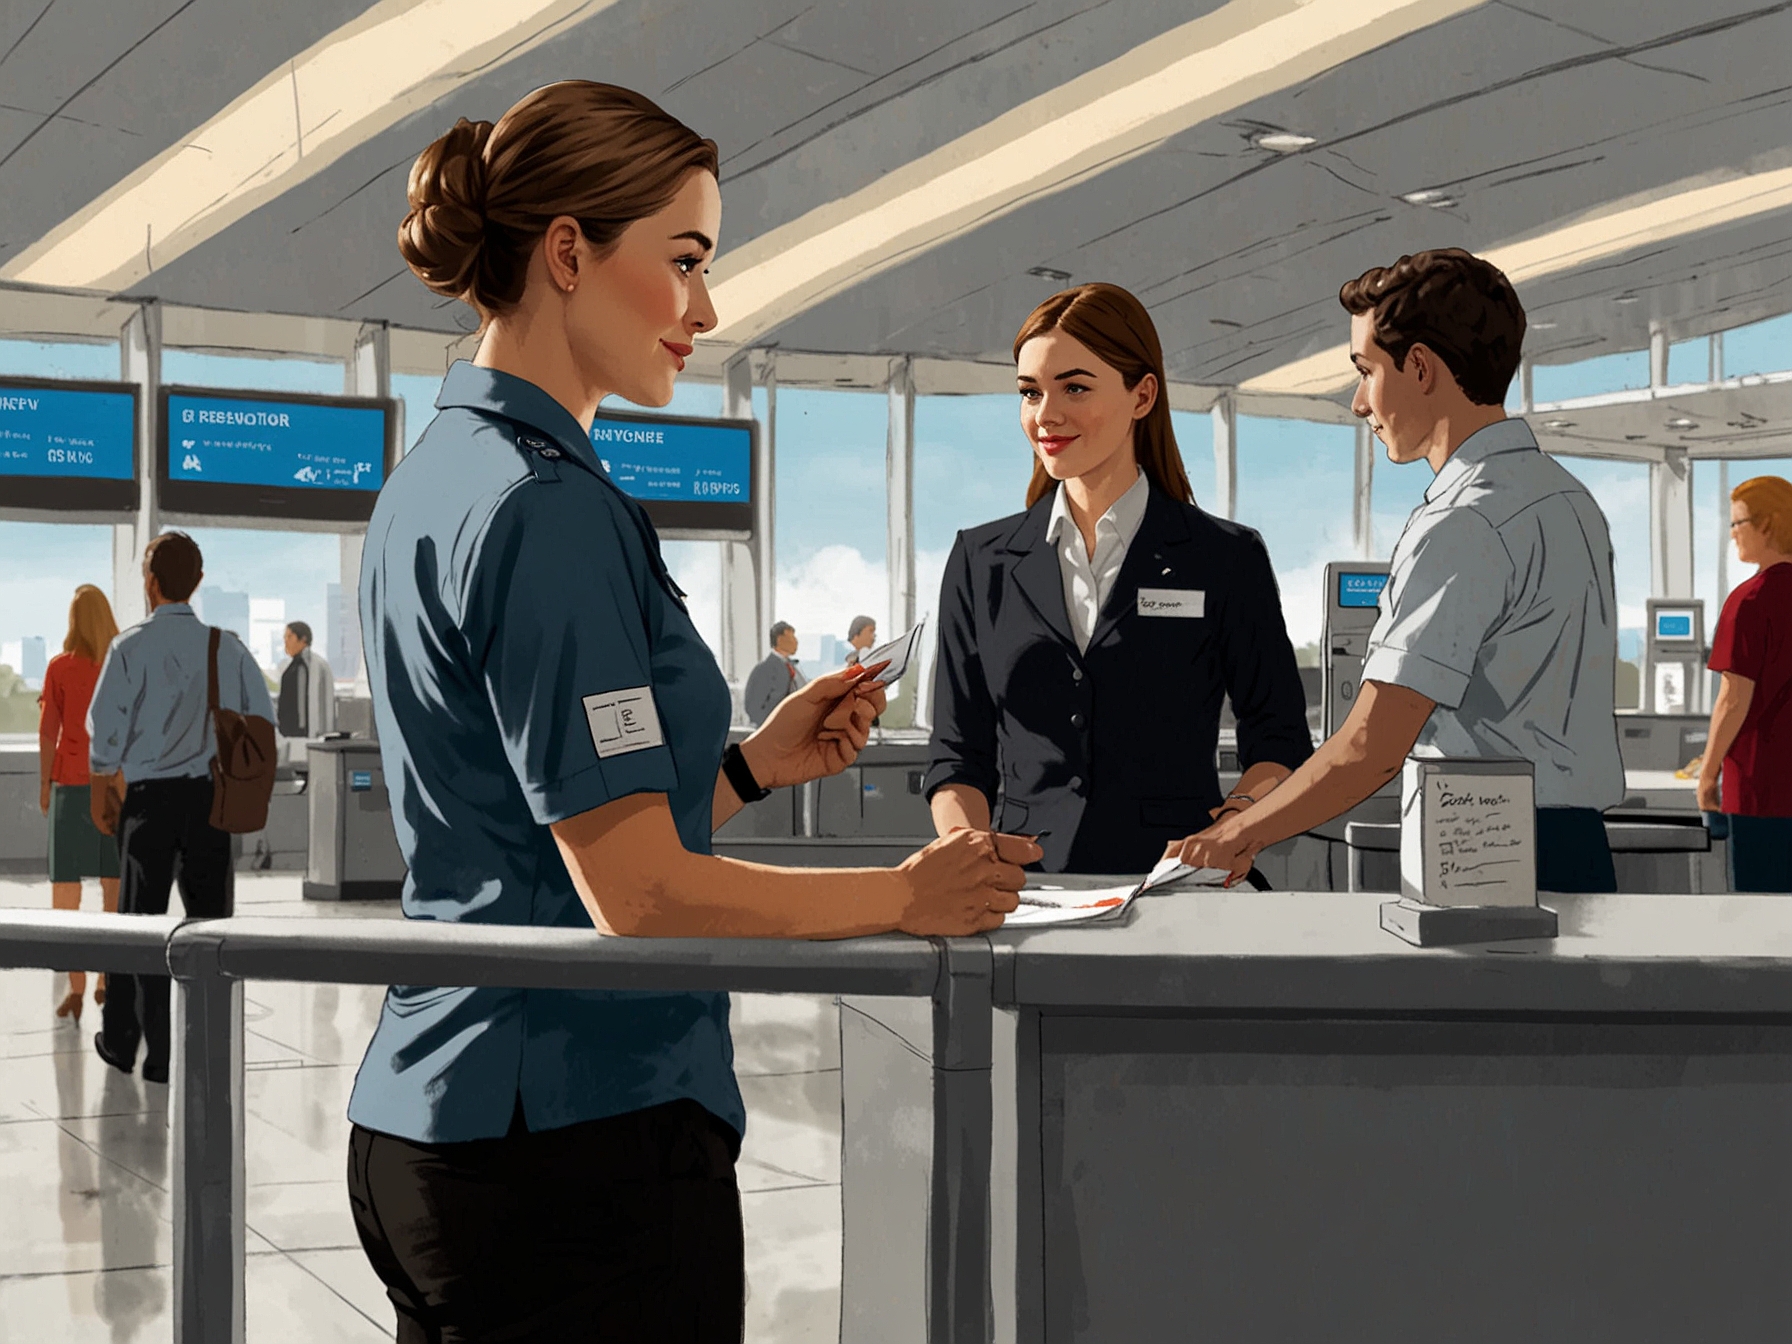 A passenger notifying airline staff about dietary restrictions while checking in at the airport counter, emphasizing the importance of advance communication for special meal options.